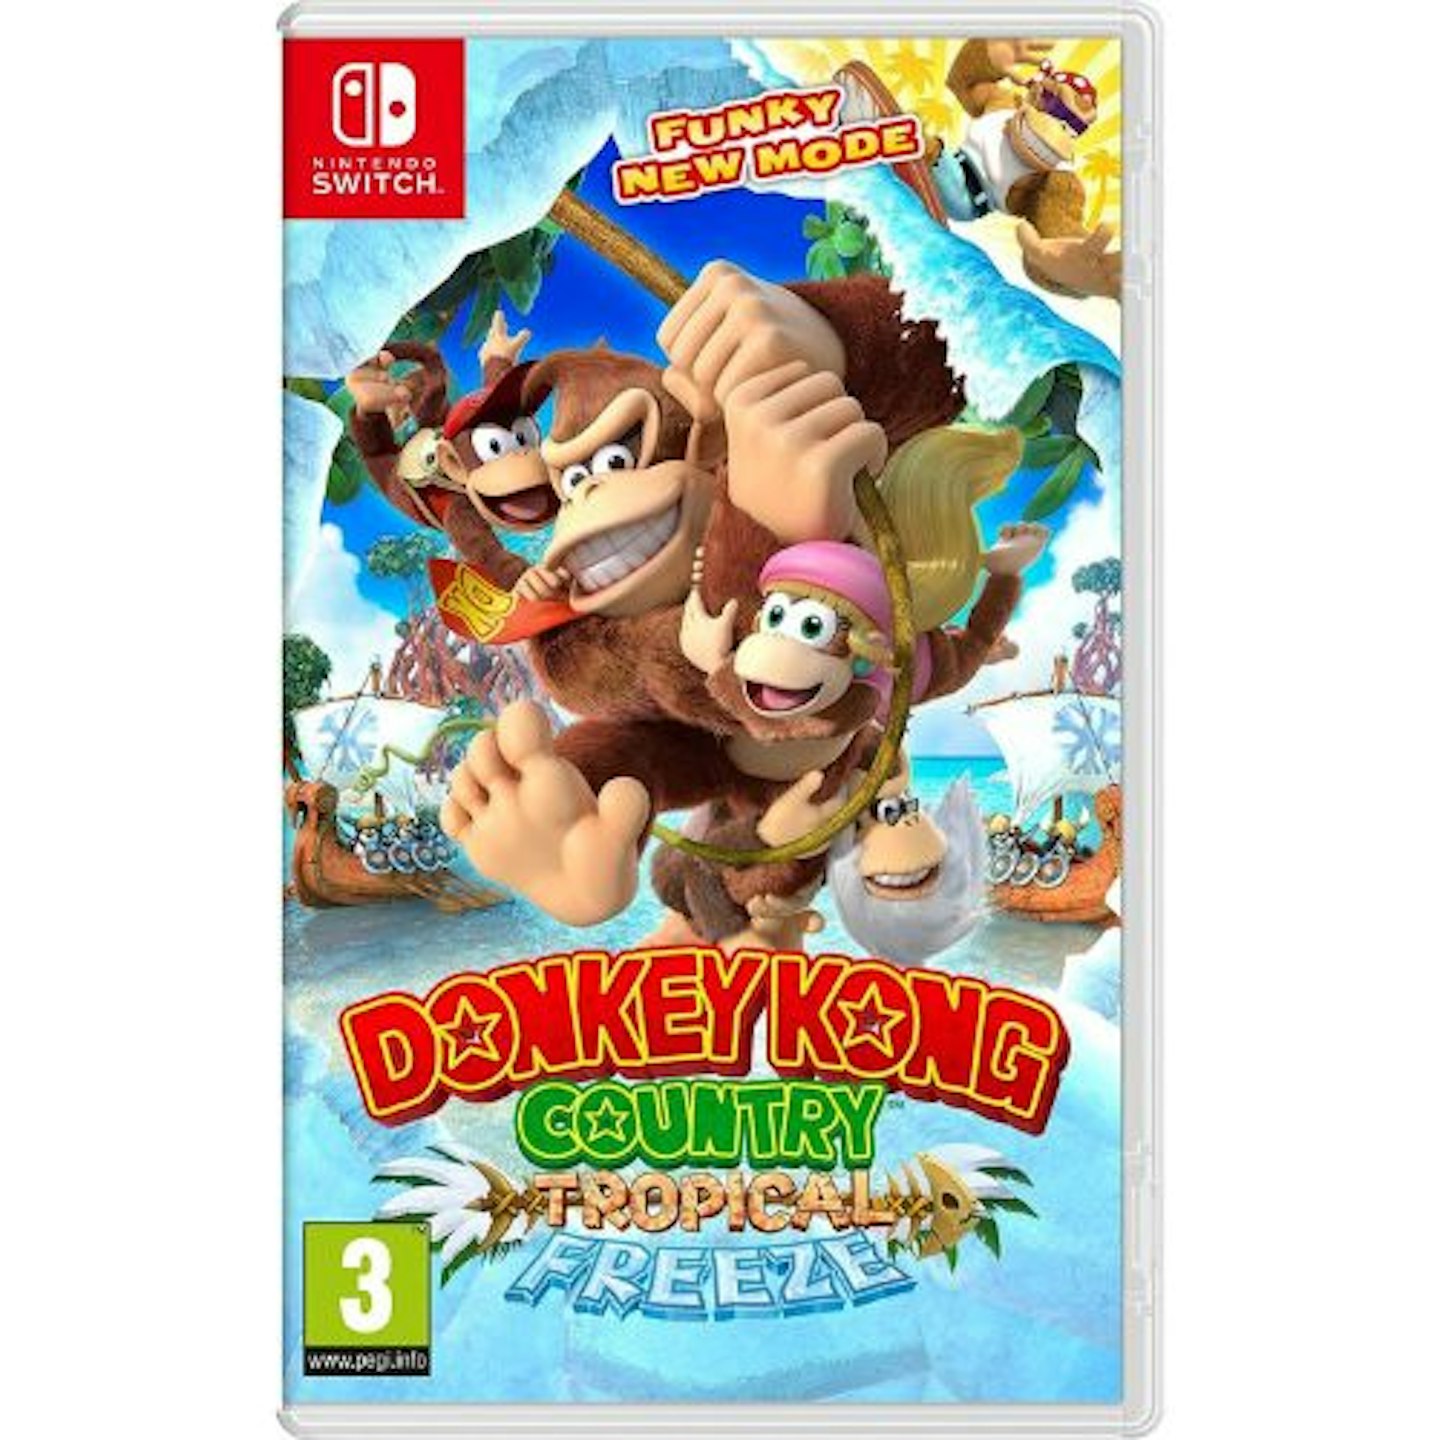 Best kid friendly switch games Donkey Kong Country: Tropical Freeze